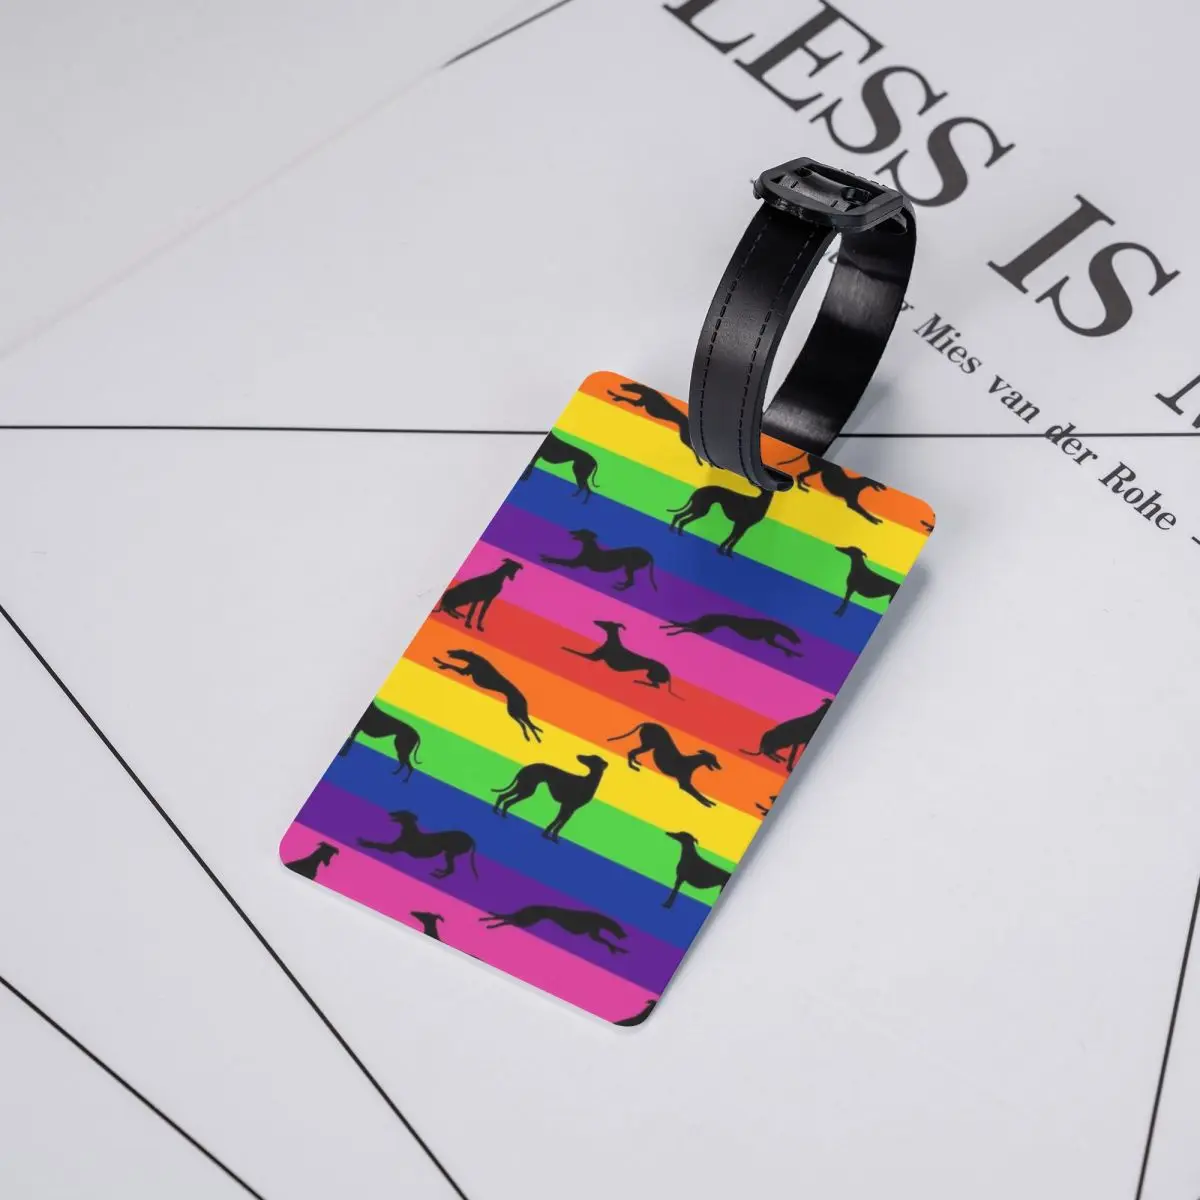 Custom Greyt Greyhound Rainbow Luggage Tag Privacy Protection Whippet Sighthound Dog Baggage Tags Travel Bag Labels Suitcase